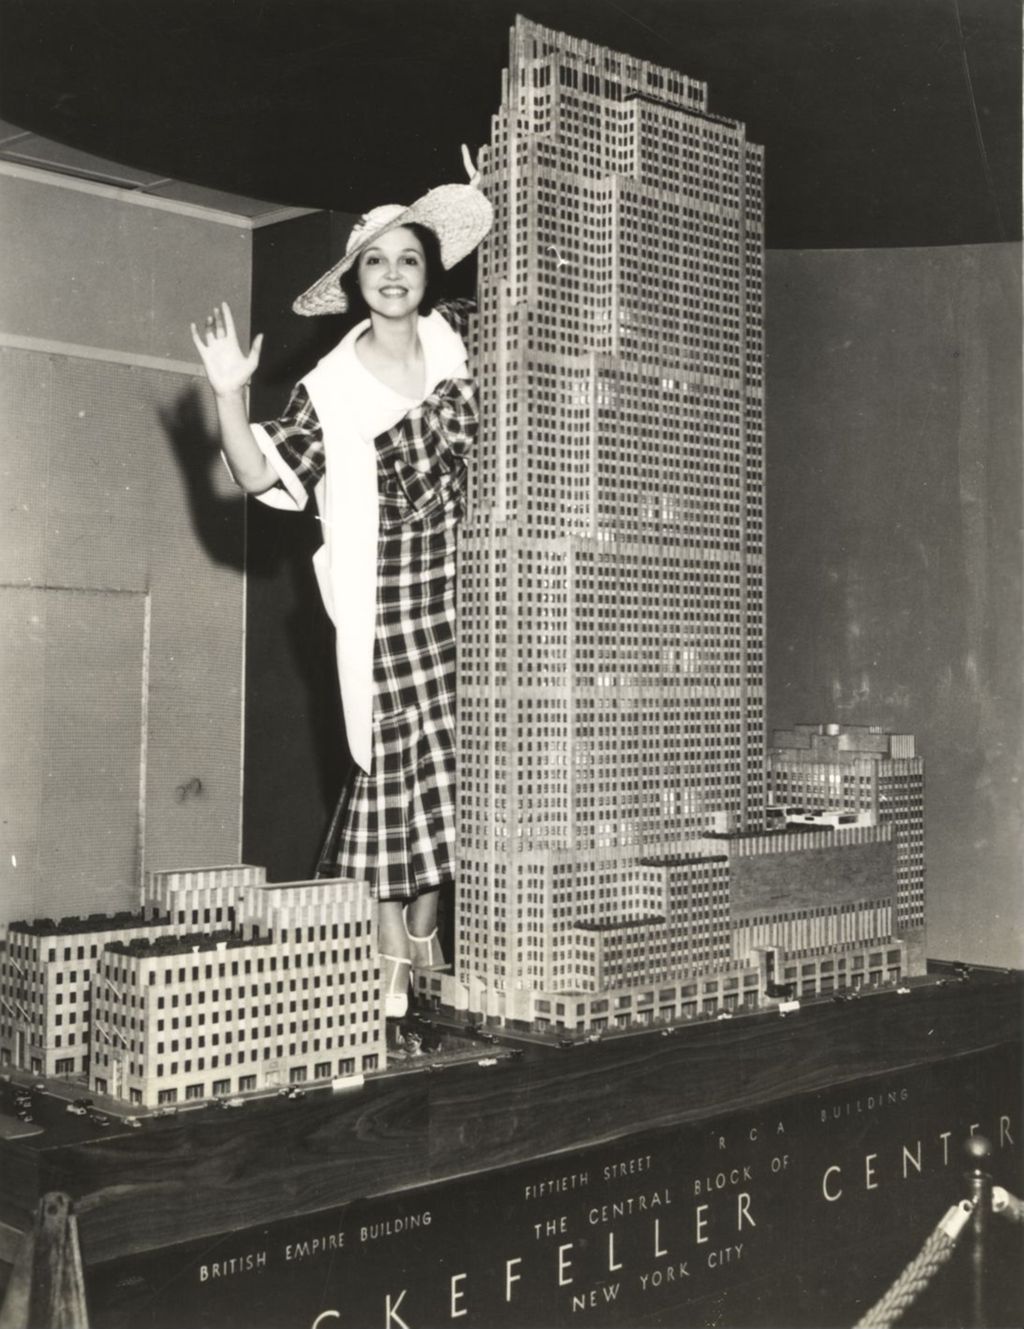 NBC radio star waves from the model of the RCA building in Rockefeller Center